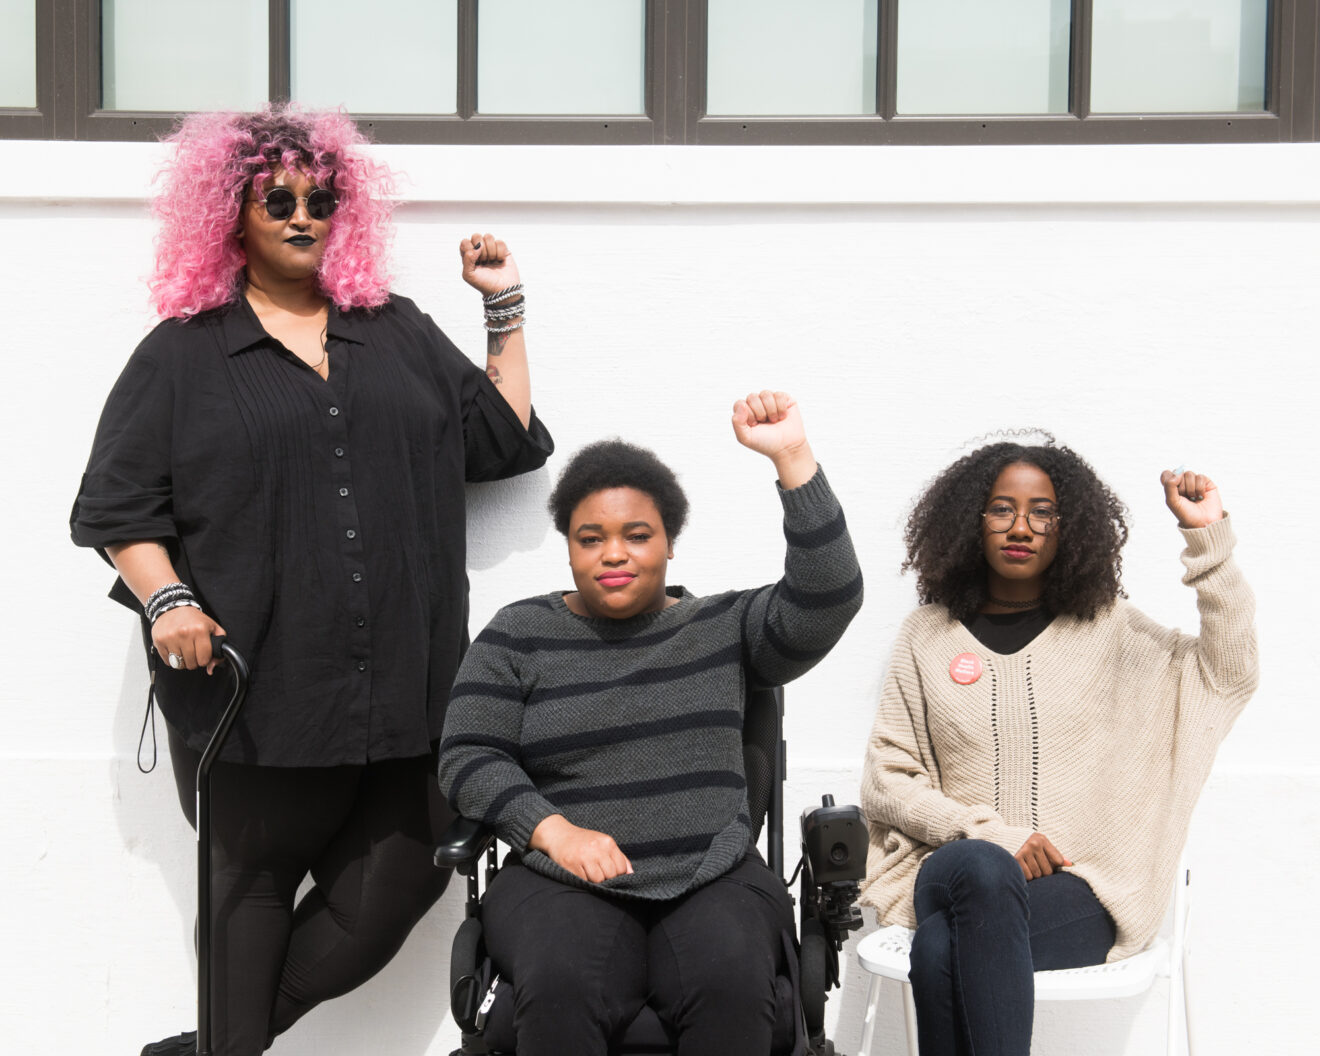 Three people, one holding a cane, one in a power wheelchair, and on a chair raising their fists in front of a white wall.